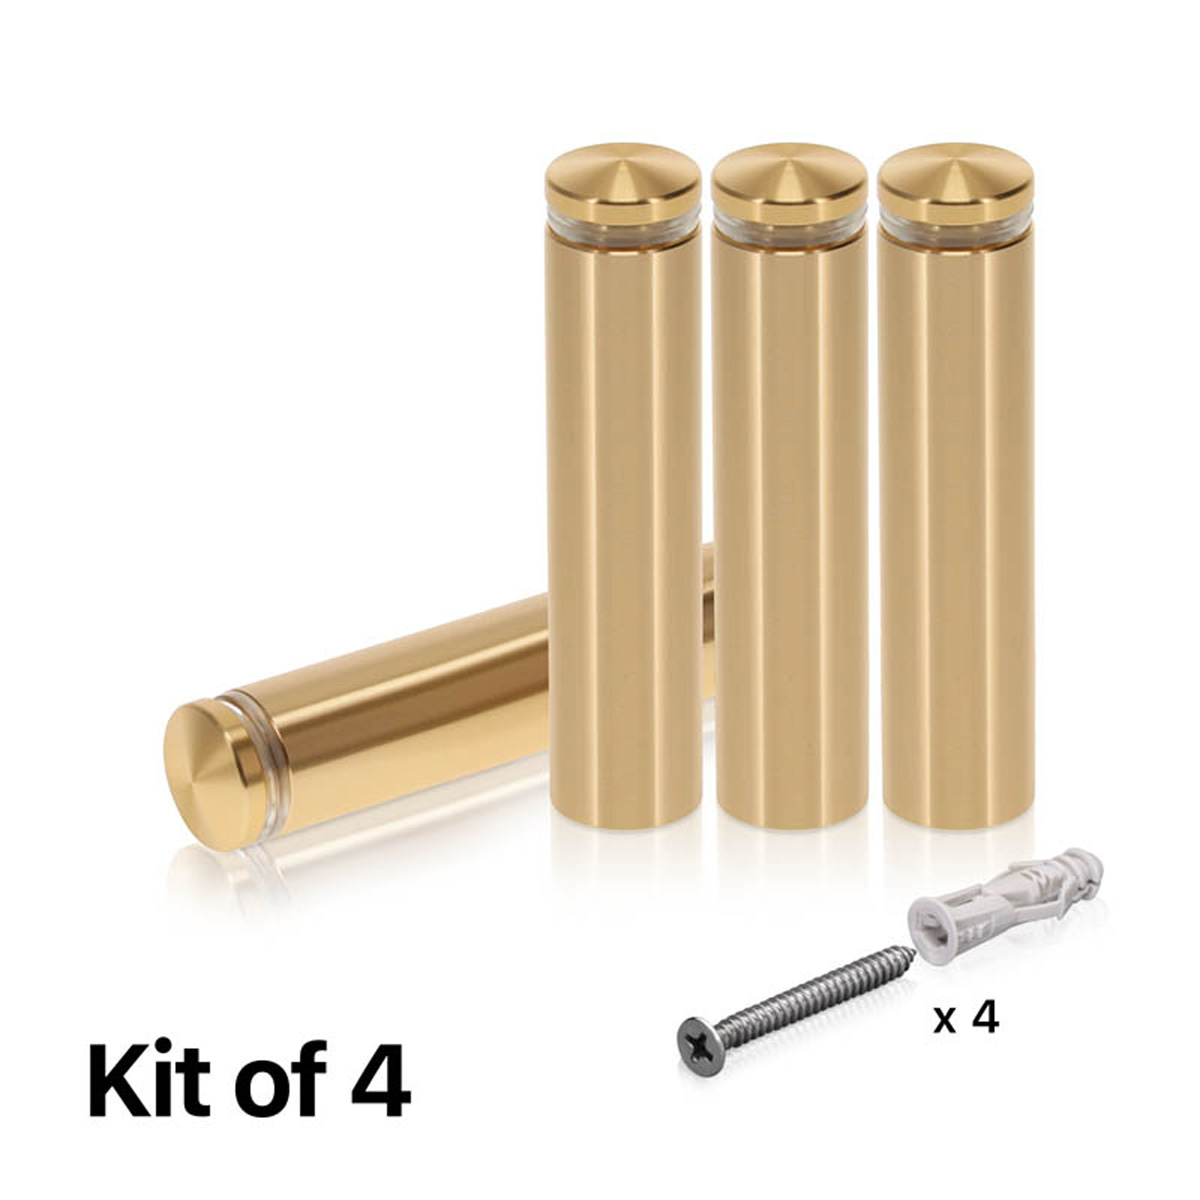 (Set of 4) 5/8'' Diameter X 2-1/2'' Barrel Length, Aluminum Rounded Head Standoffs, Champagne Anodized Finish Standoff with (4) 2208Z Screw and (4) LANC1 Anchor for concrete or drywall (For Inside / Outside use) [Required Material Hole Size: 7/16'']